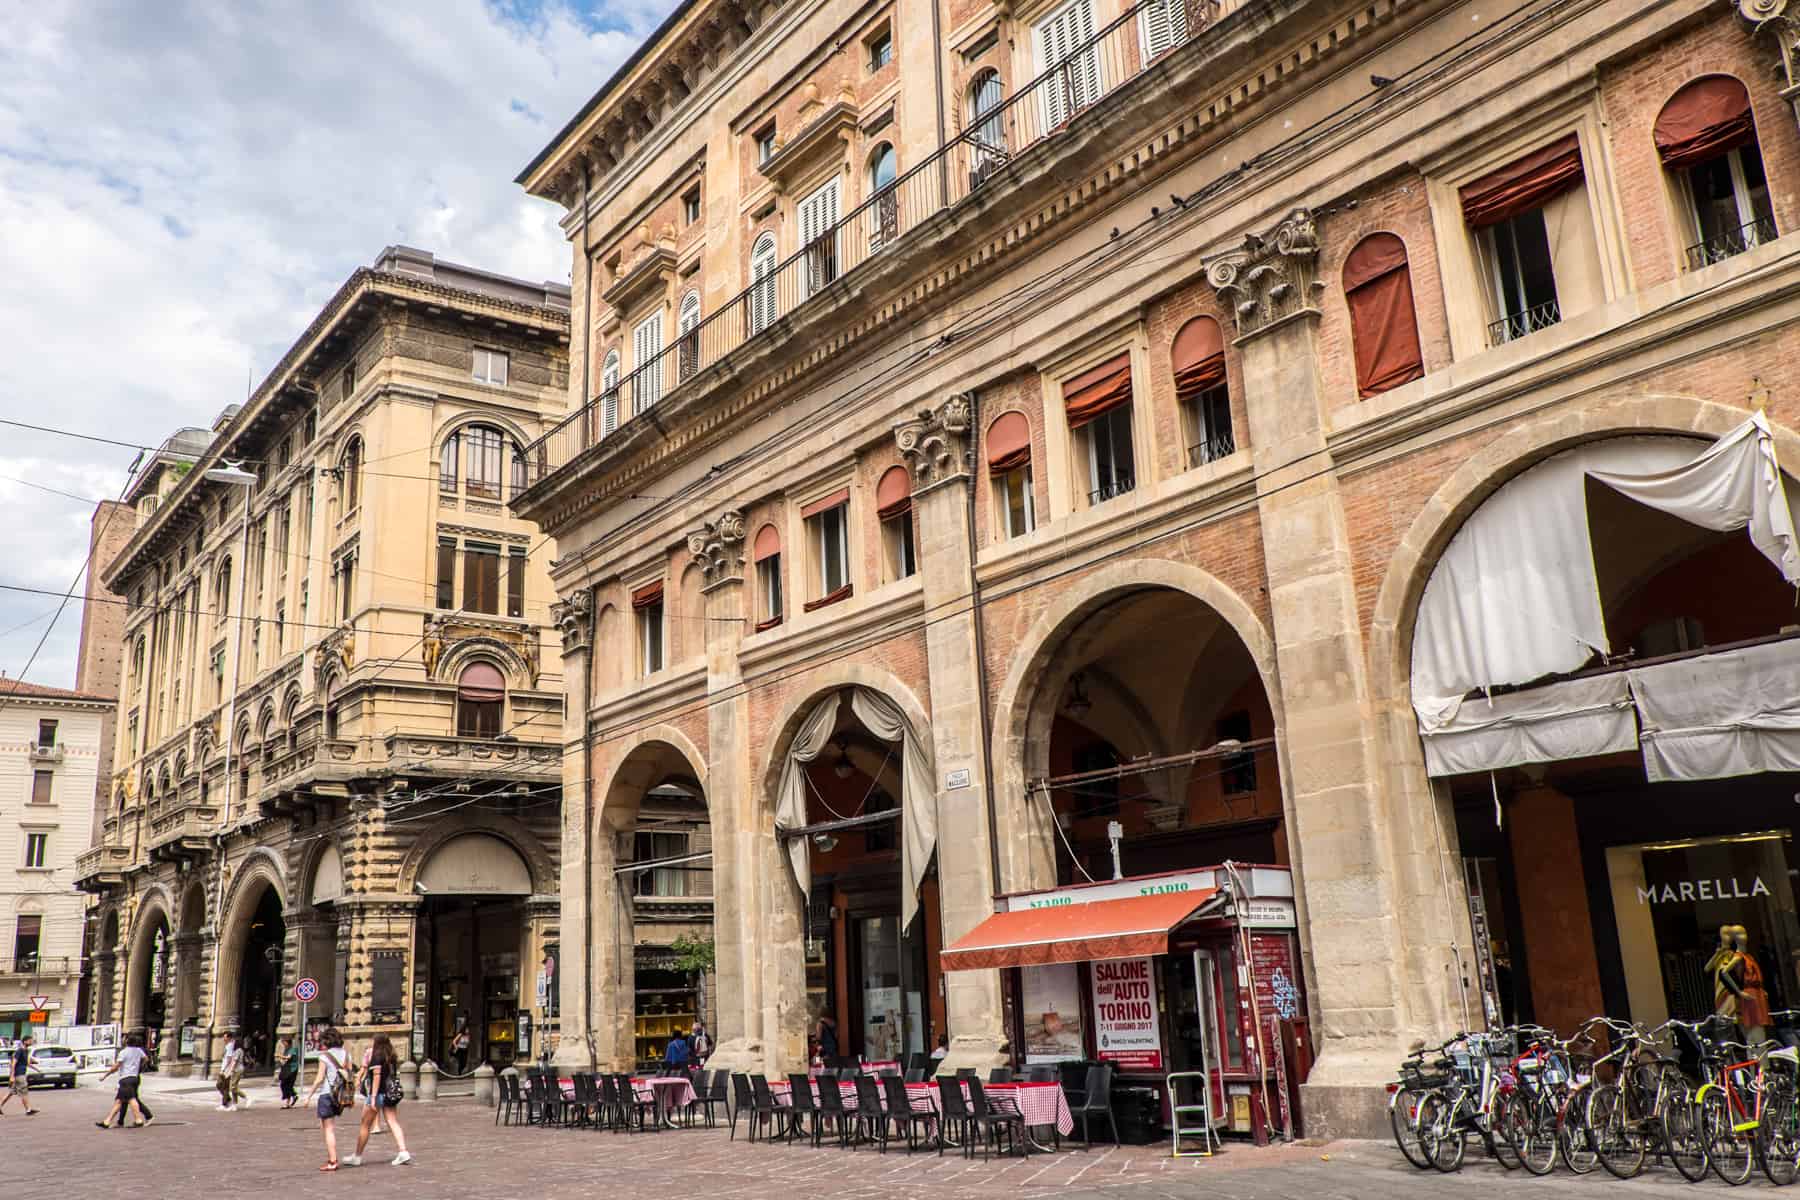 A tall and wide golden brown structure with Renaissance architecture columns, archways and decorative balcony in Bologna's Piazza Maggiore. 